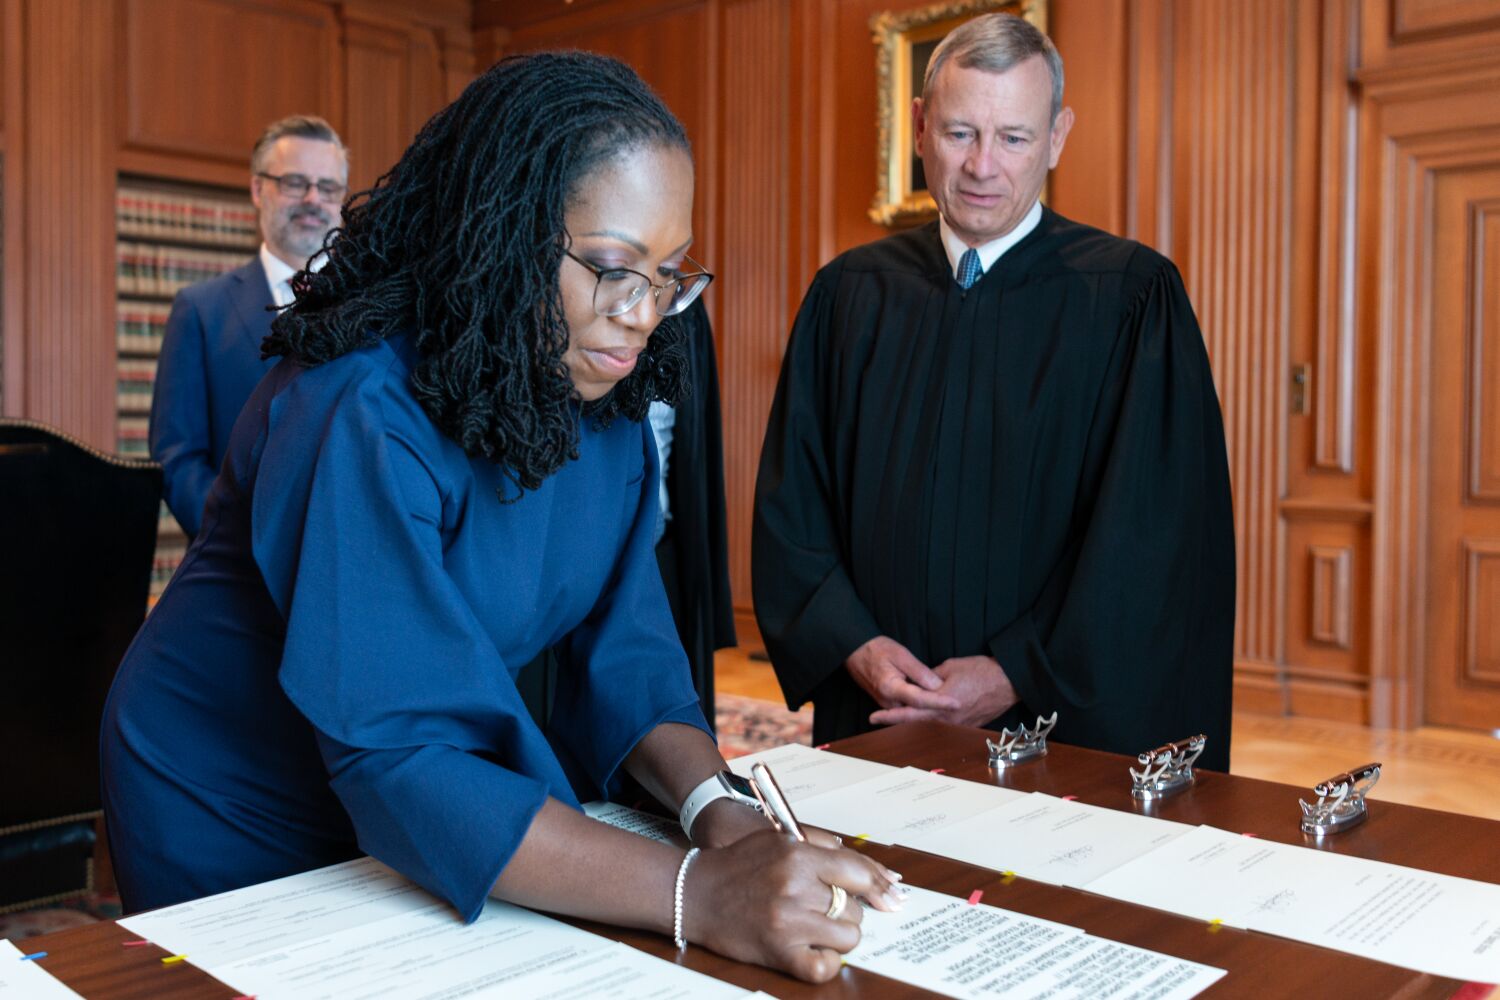 Joined by first Black woman on Supreme Court, justices to tackle affirmative action, voting rights